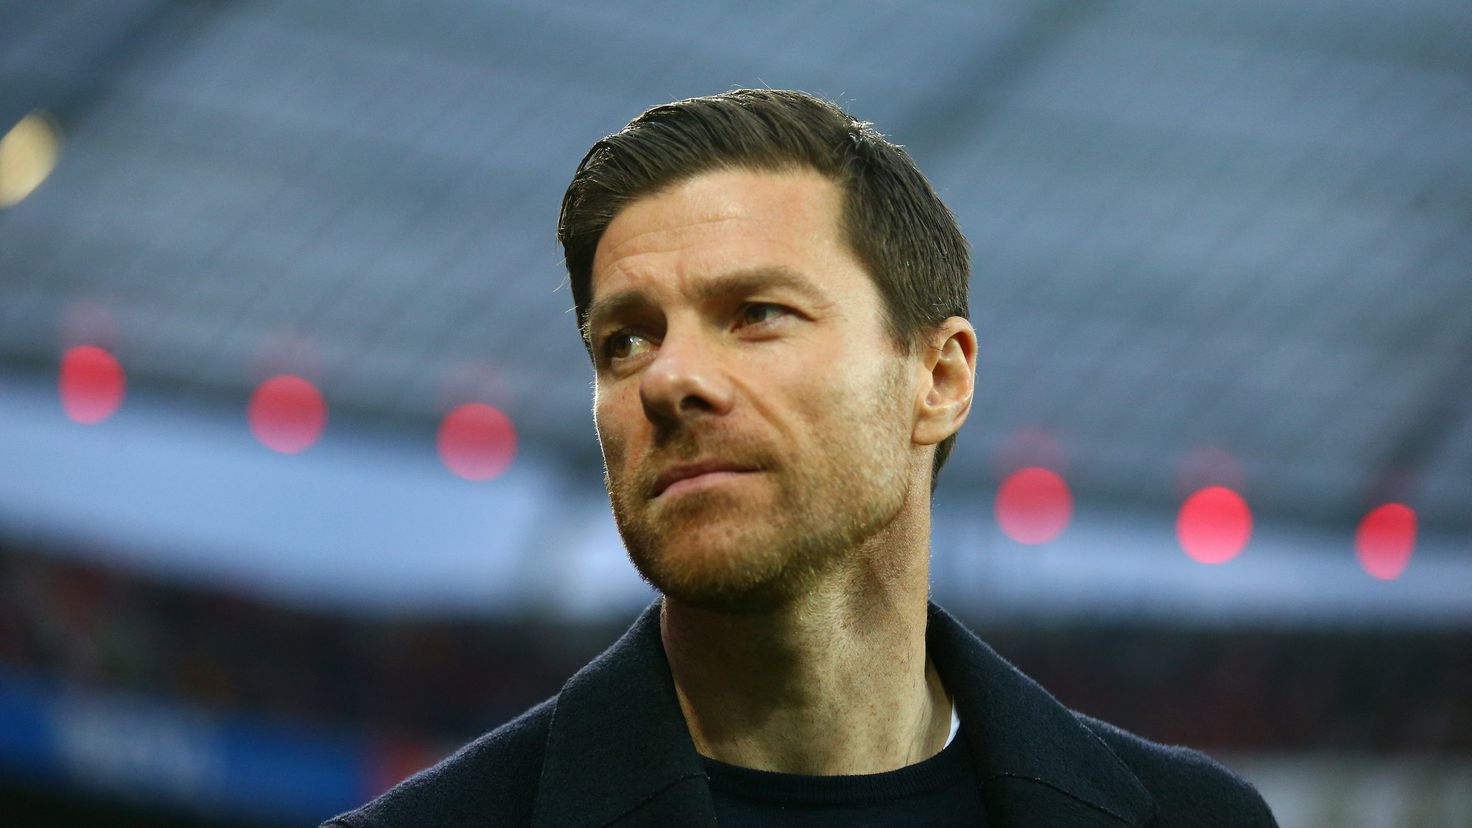 Xabi Alonso's future resolved: he will continue at Bayer
